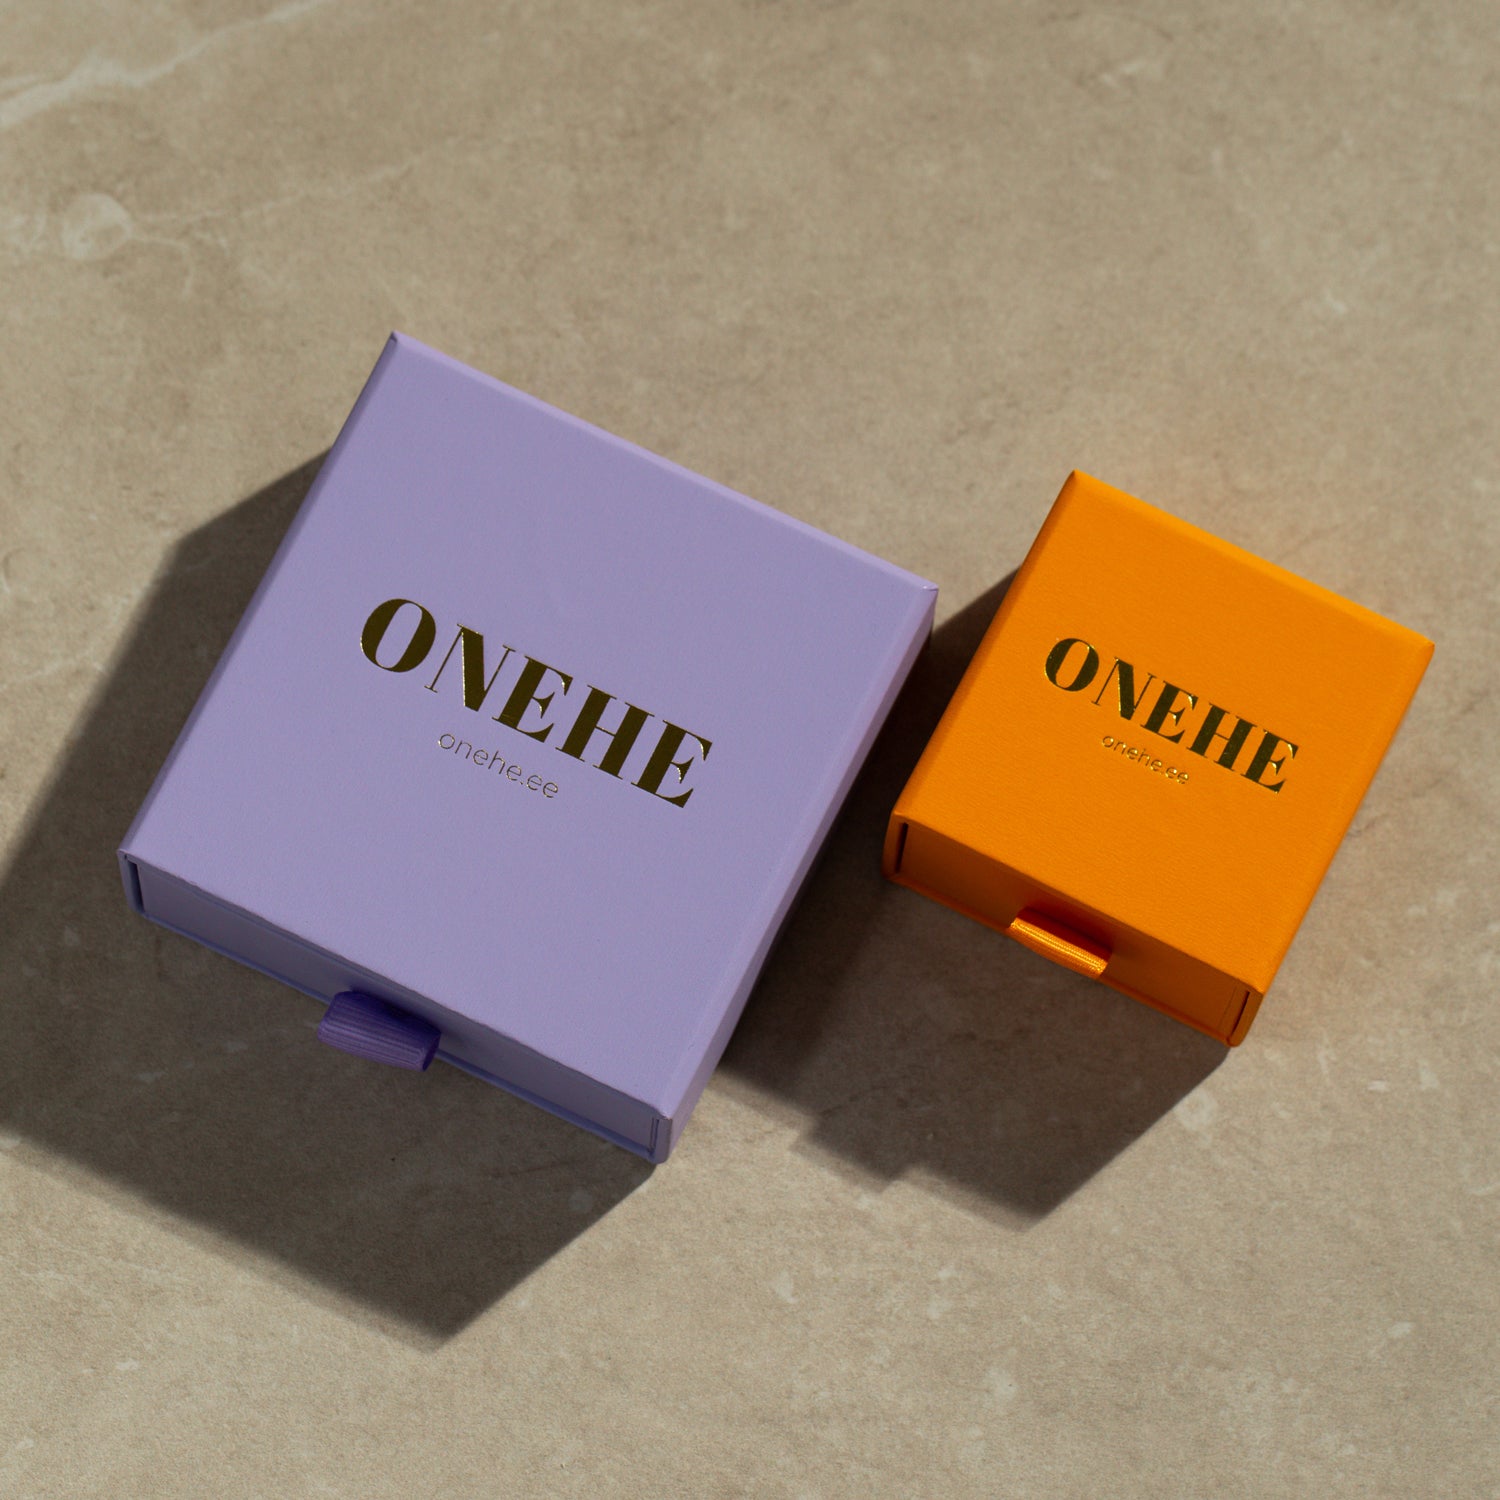 Golden heart-shaped stud earrings on marble surface, purple and orange boxes with gold text, close-up of logo. Sustainable, hypoallergenic ONEHE earrings made from recycled silver, plated with 18k gold. Size: 7 x 6.5 mm.